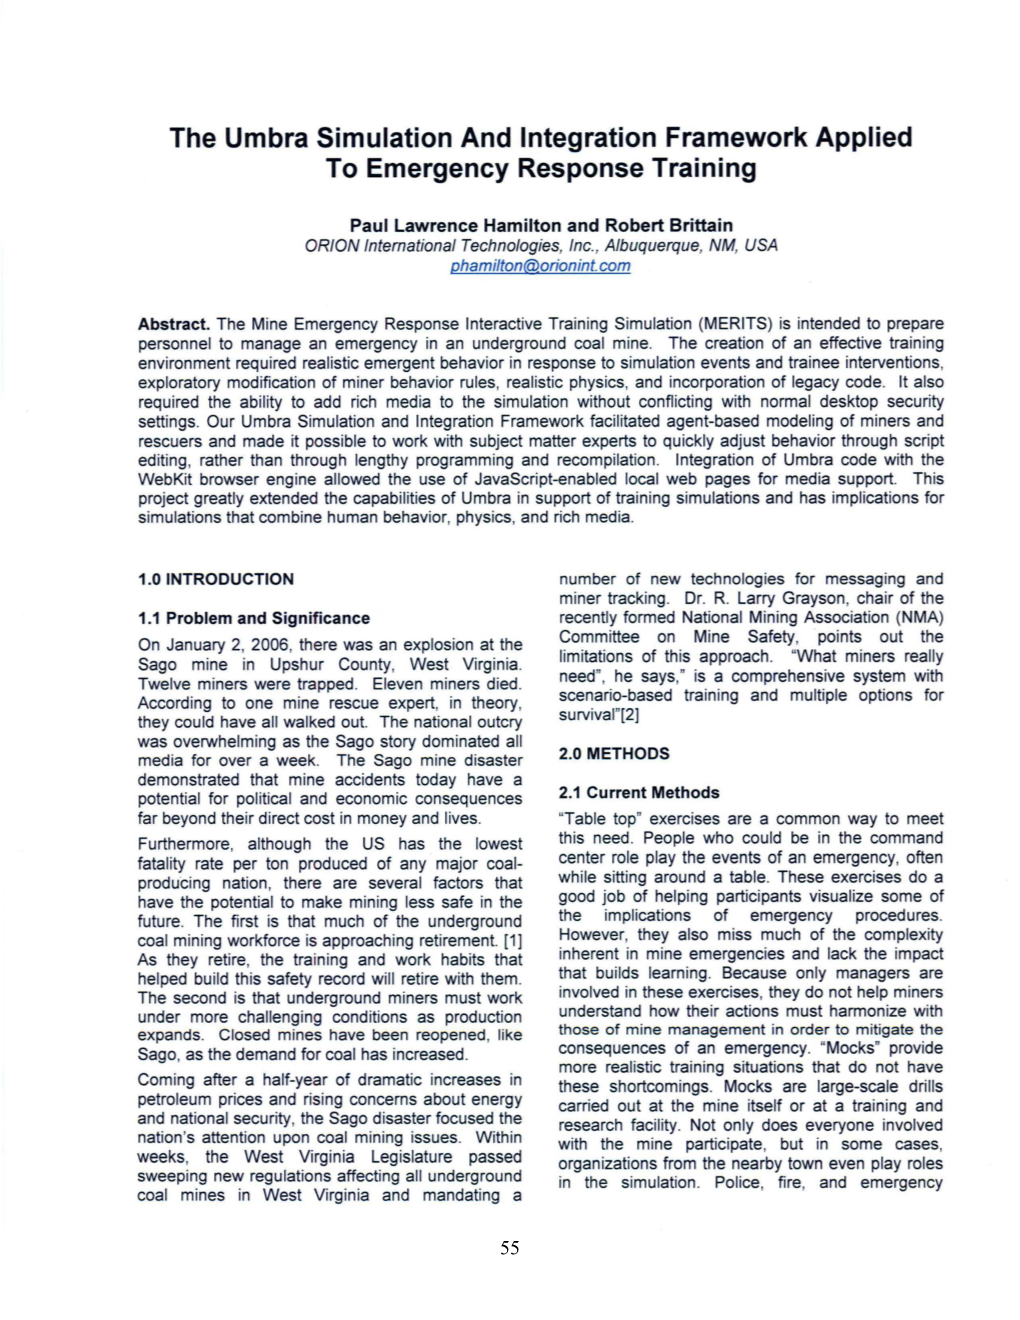 The Umbra Simulation and Integration Framework Applied to Emergency Response Training